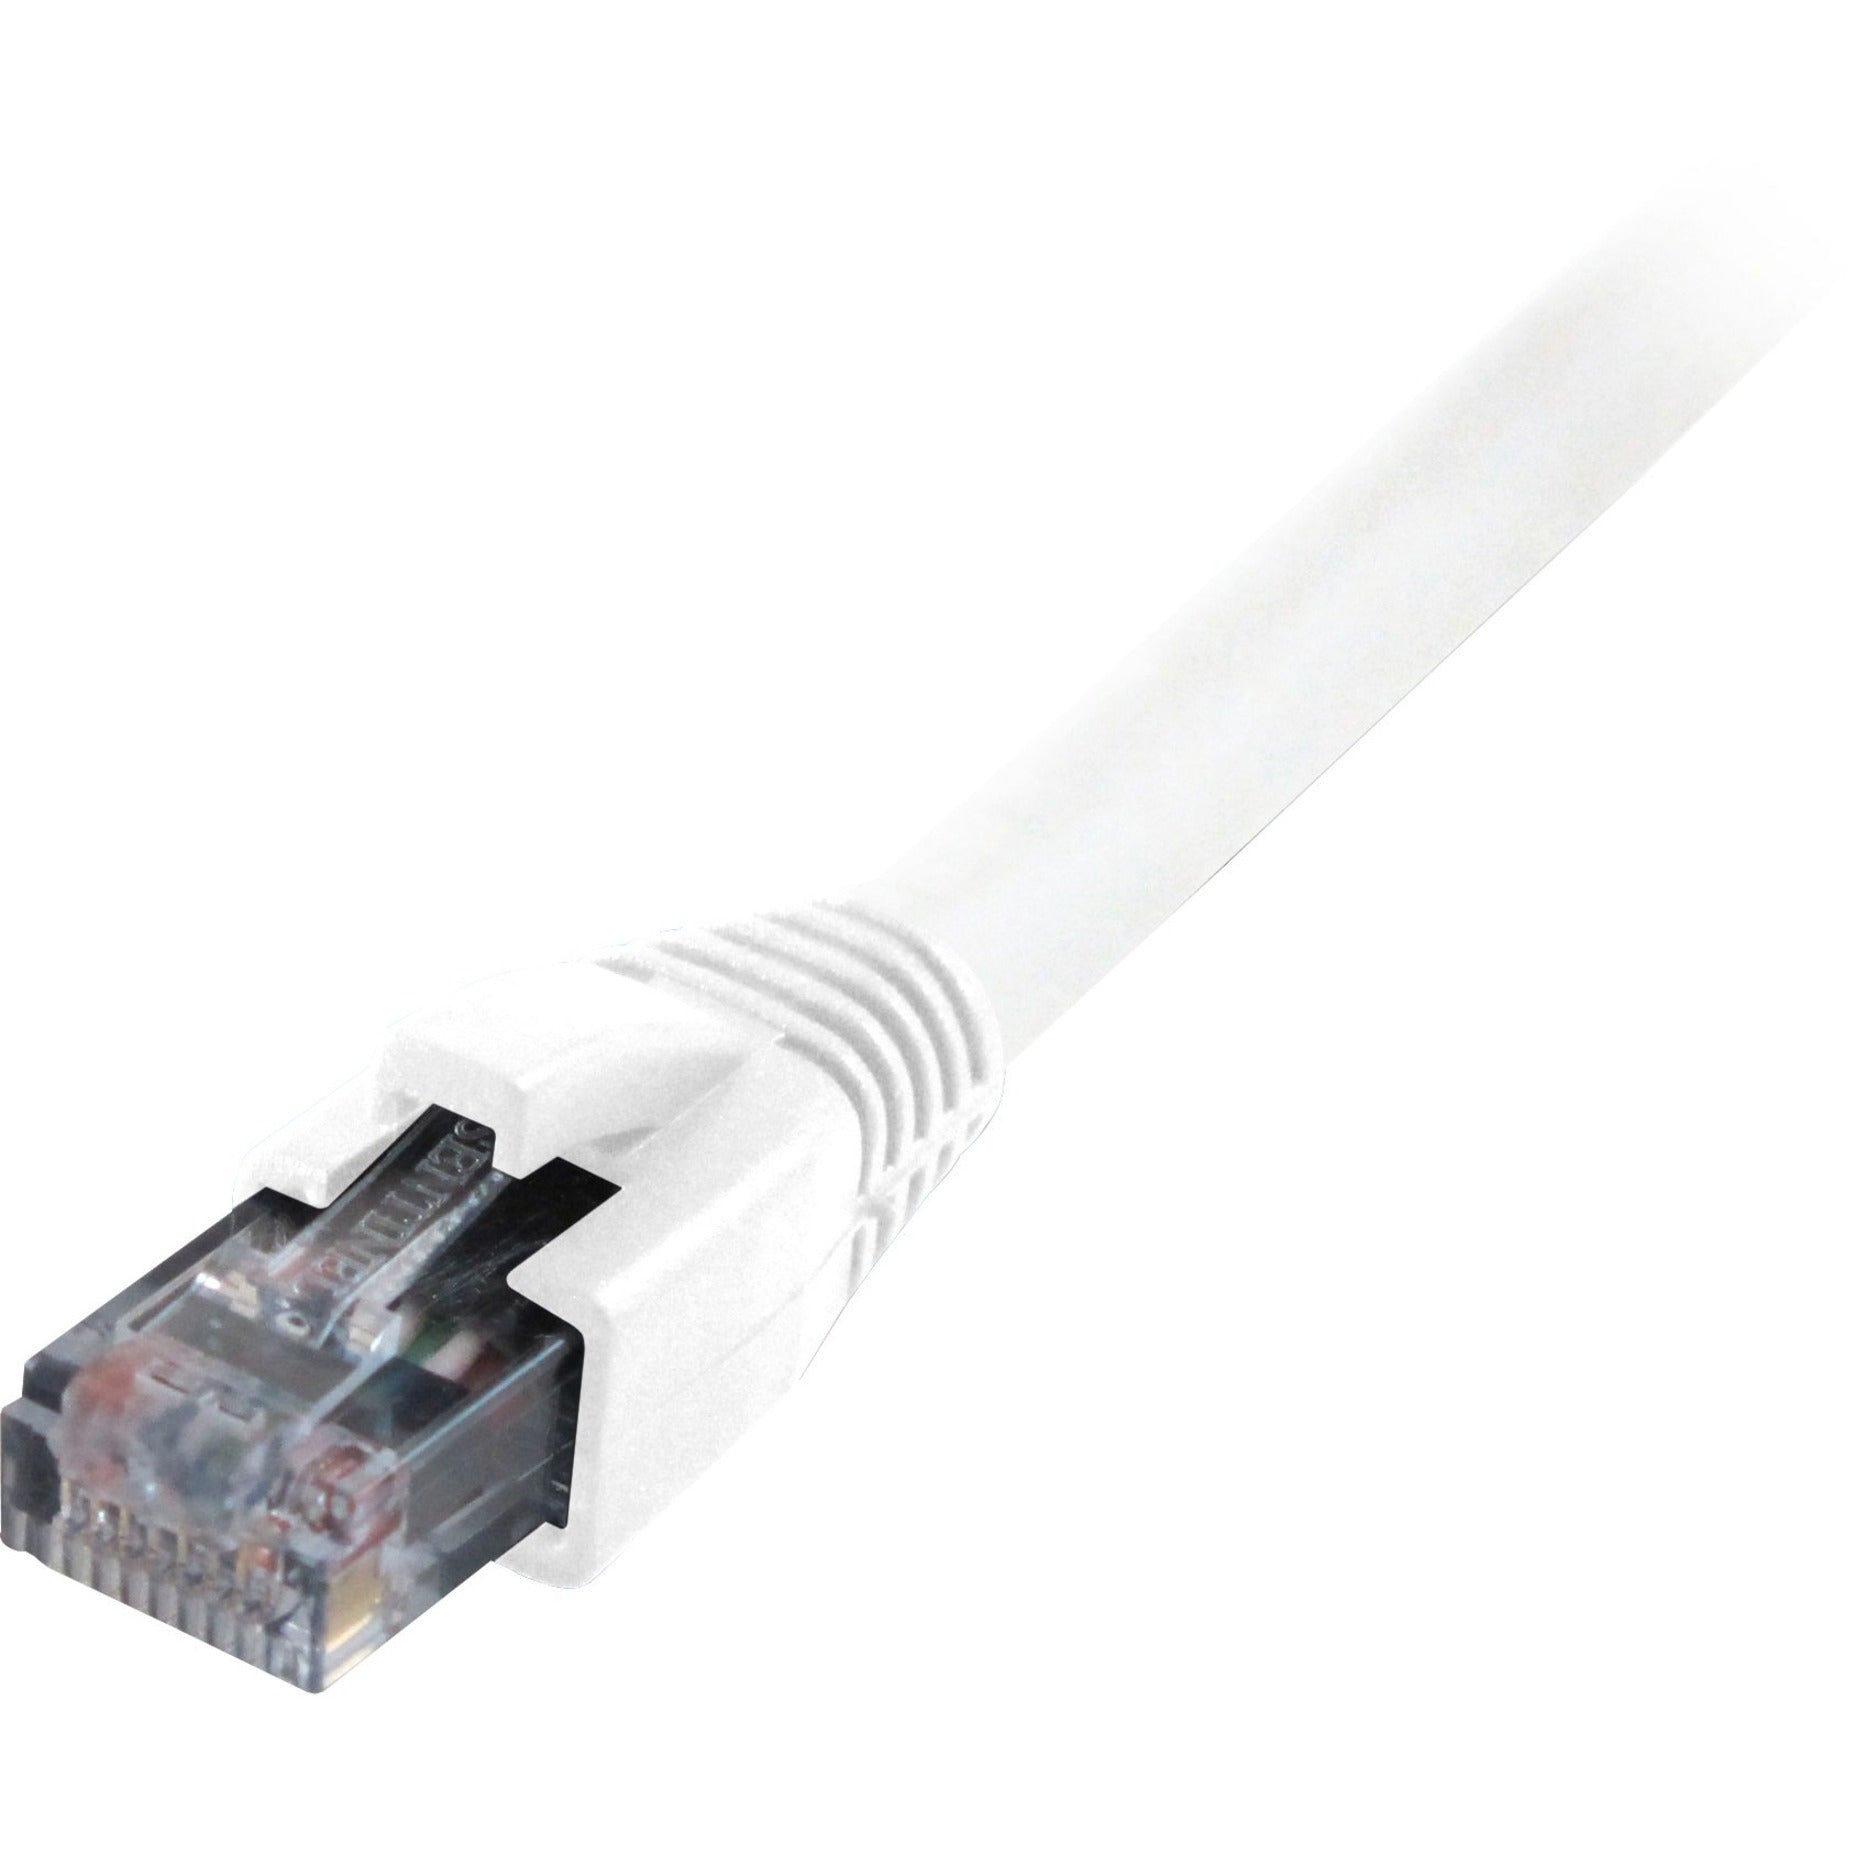 Comprehensive CAT5-350-14WHT Cat5e 350 Mhz Snagless Patch Cable 14ft White, Molded, Strain Relief, Stranded, Booted, 1 Gbit/s Data Transfer Rate